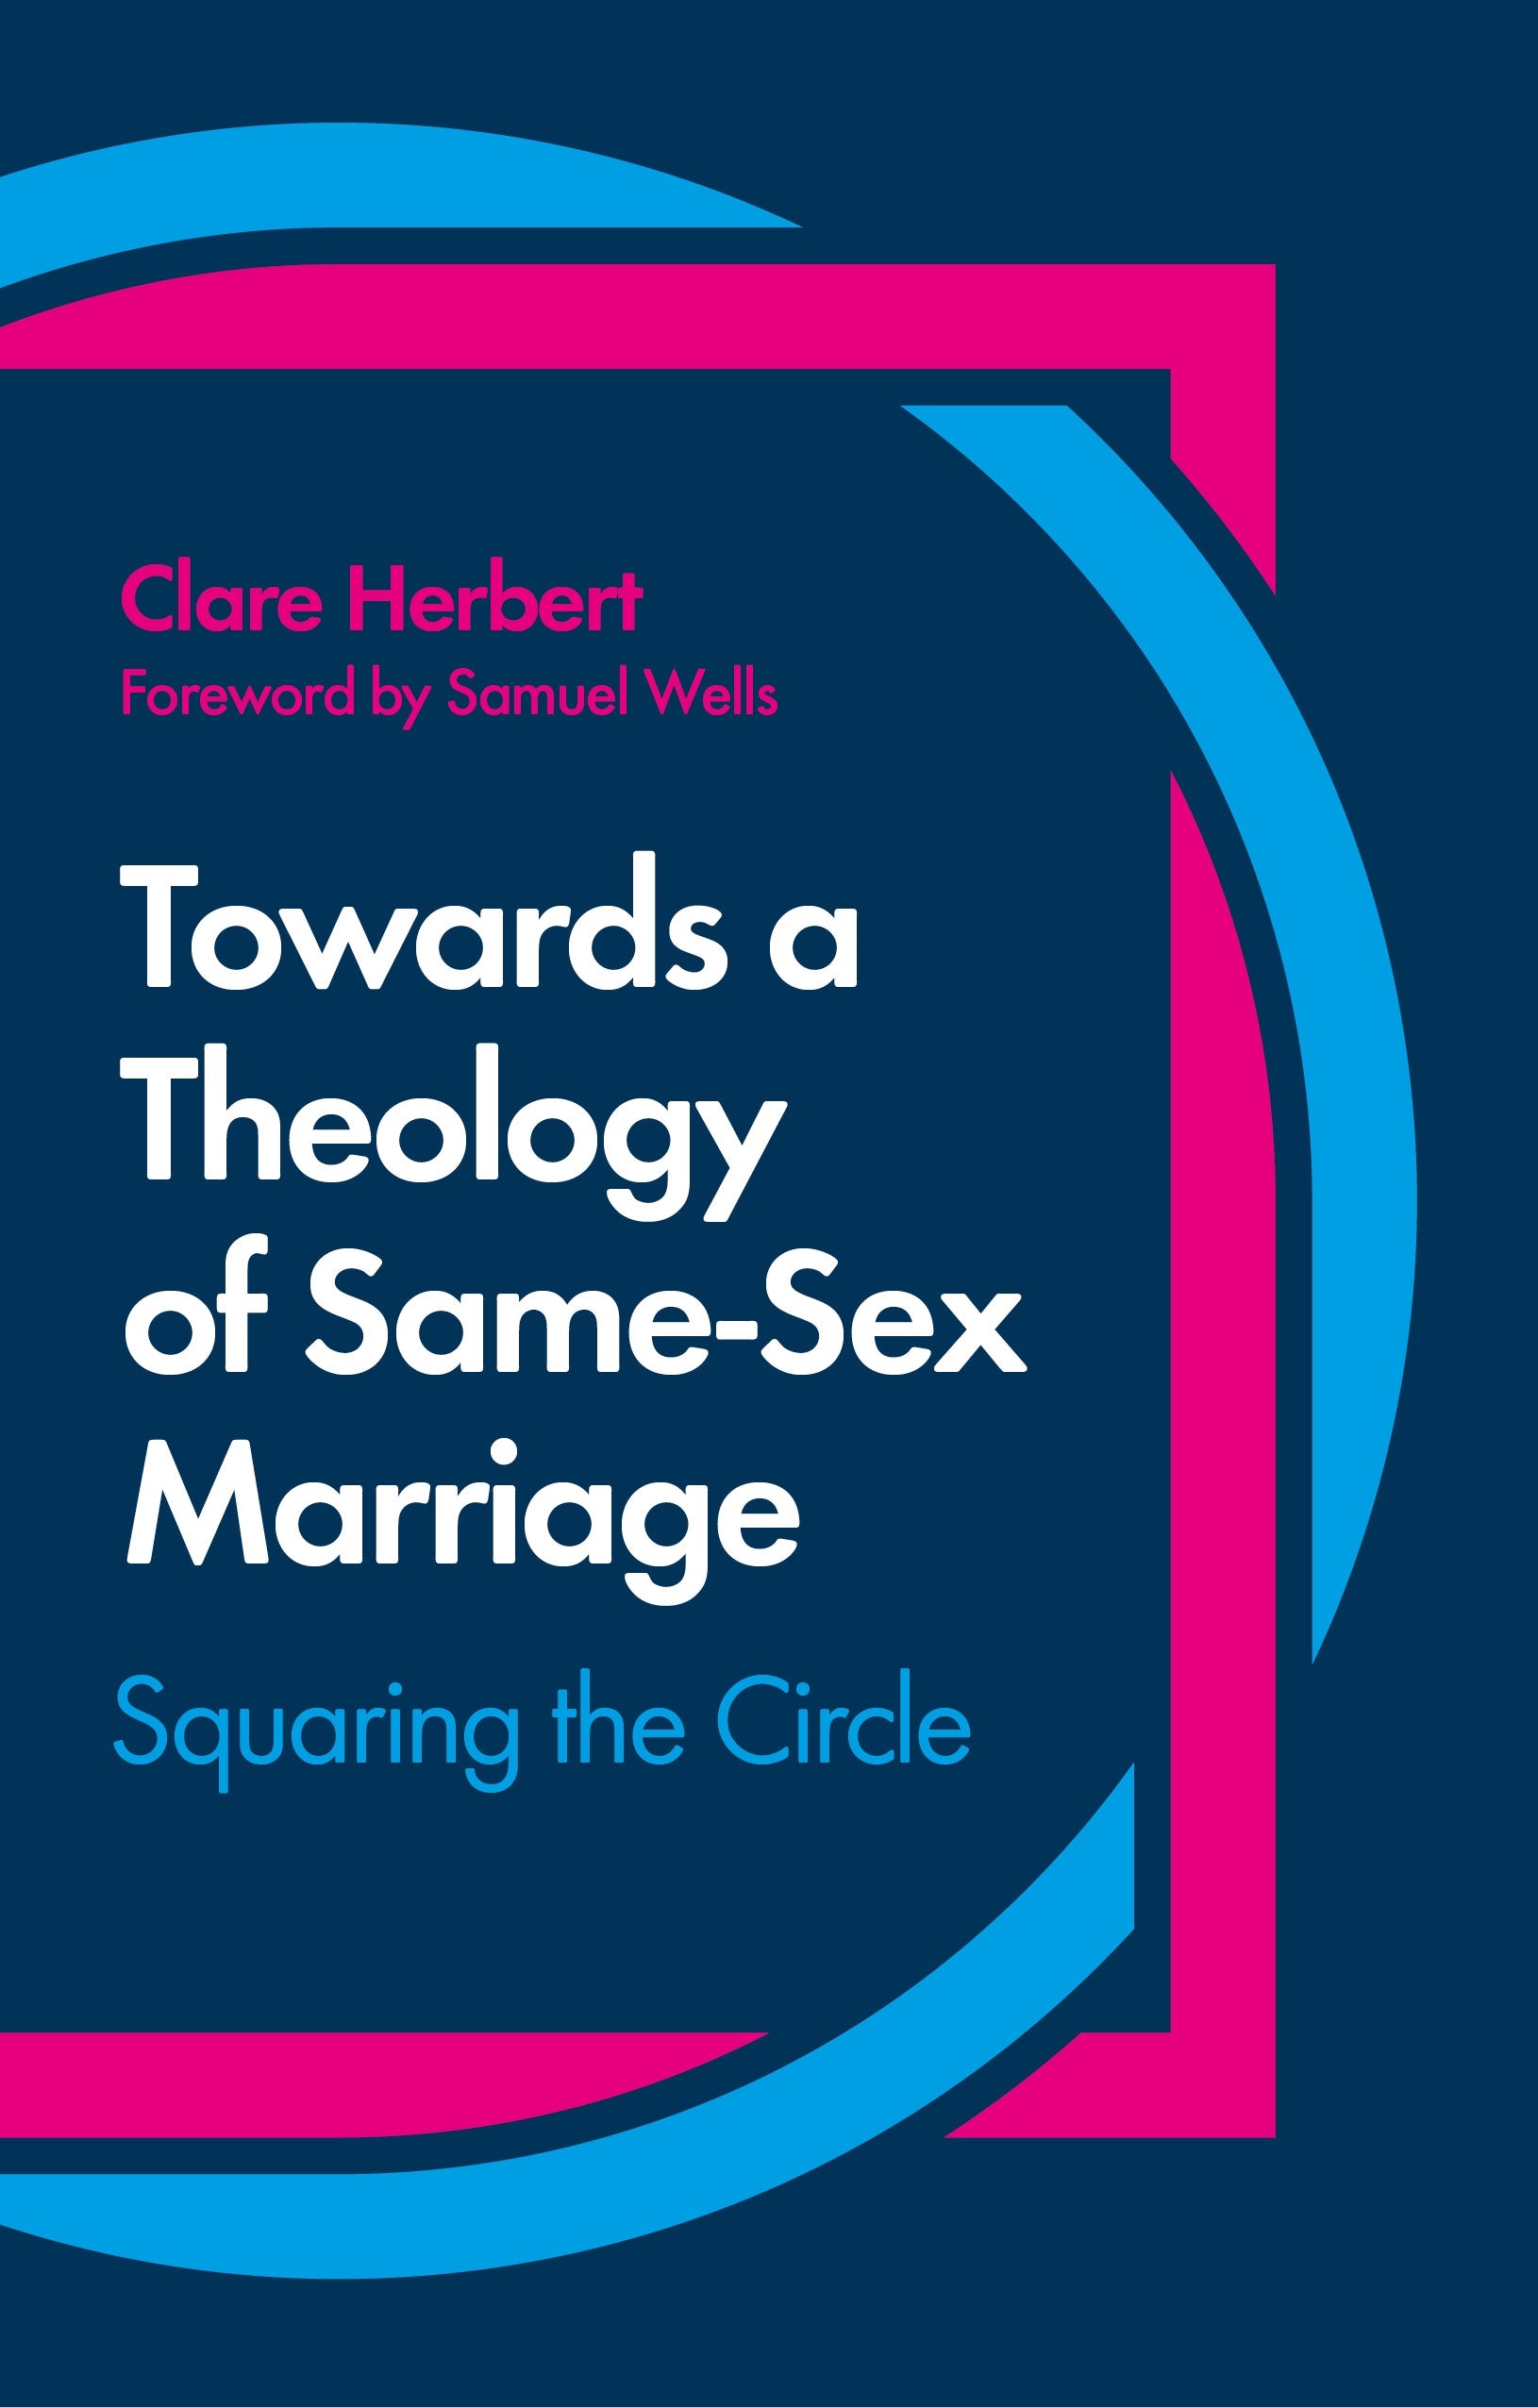 Towards a Theology of Same-Sex Marriage by Clare Herbert